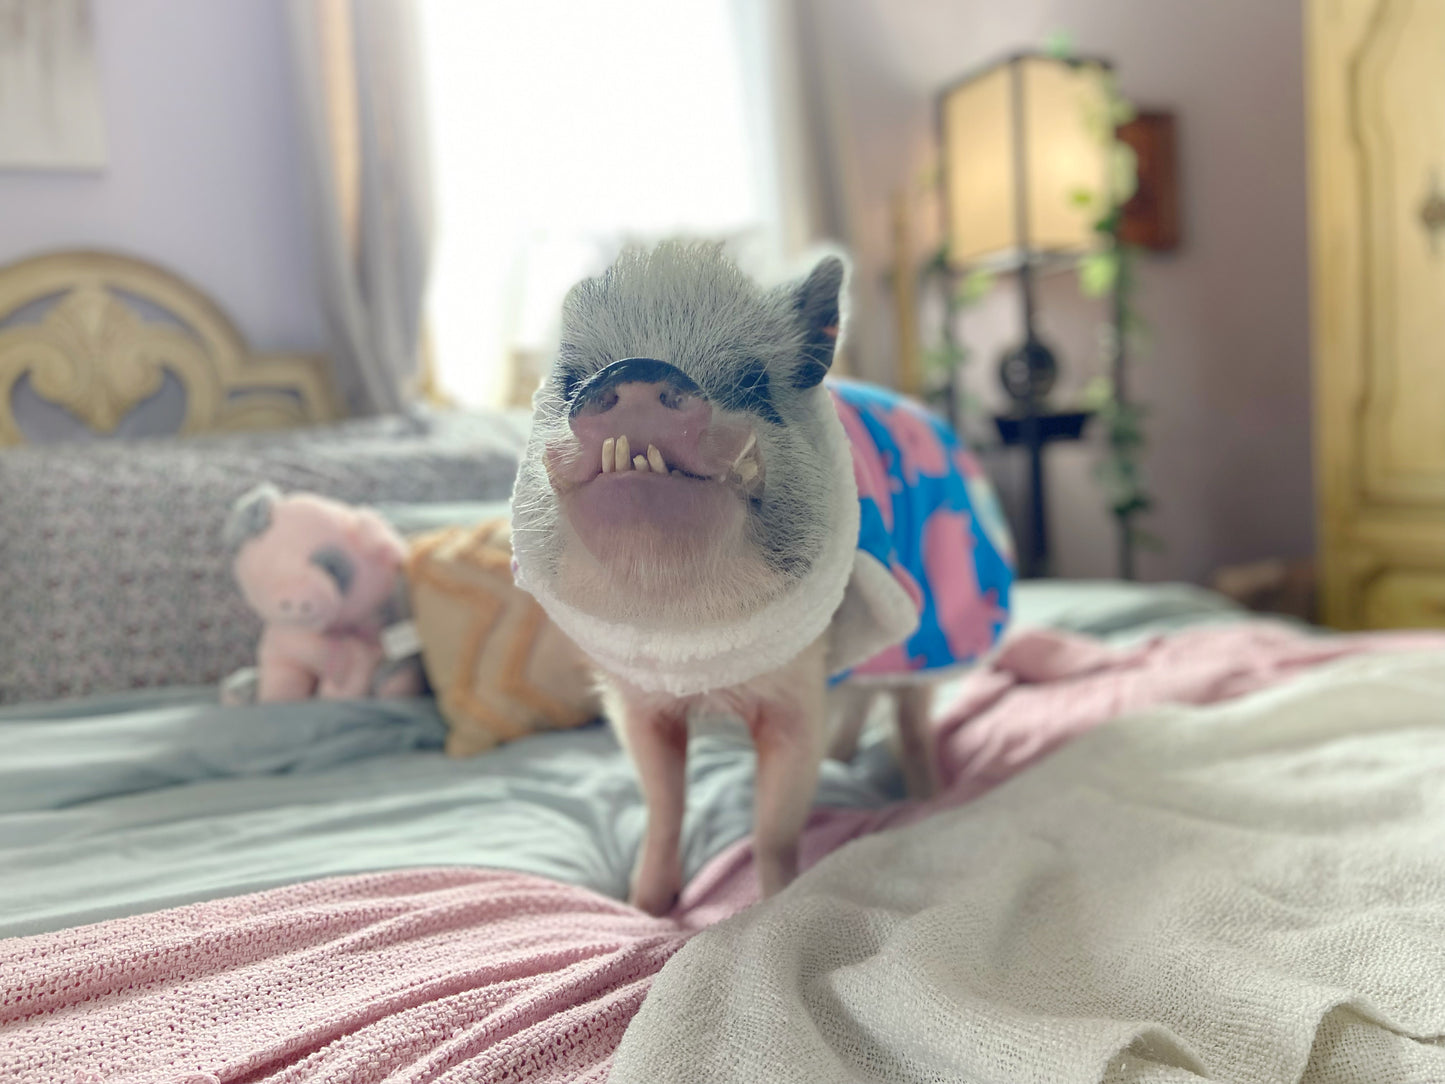 Perfect Pig Pet Sweater Handmade with Sherpa Collar, Fleece, and Belly Strap, Mini Pig Clothes for Potbelly Pigs, Kune Kune and Guinea Hogs